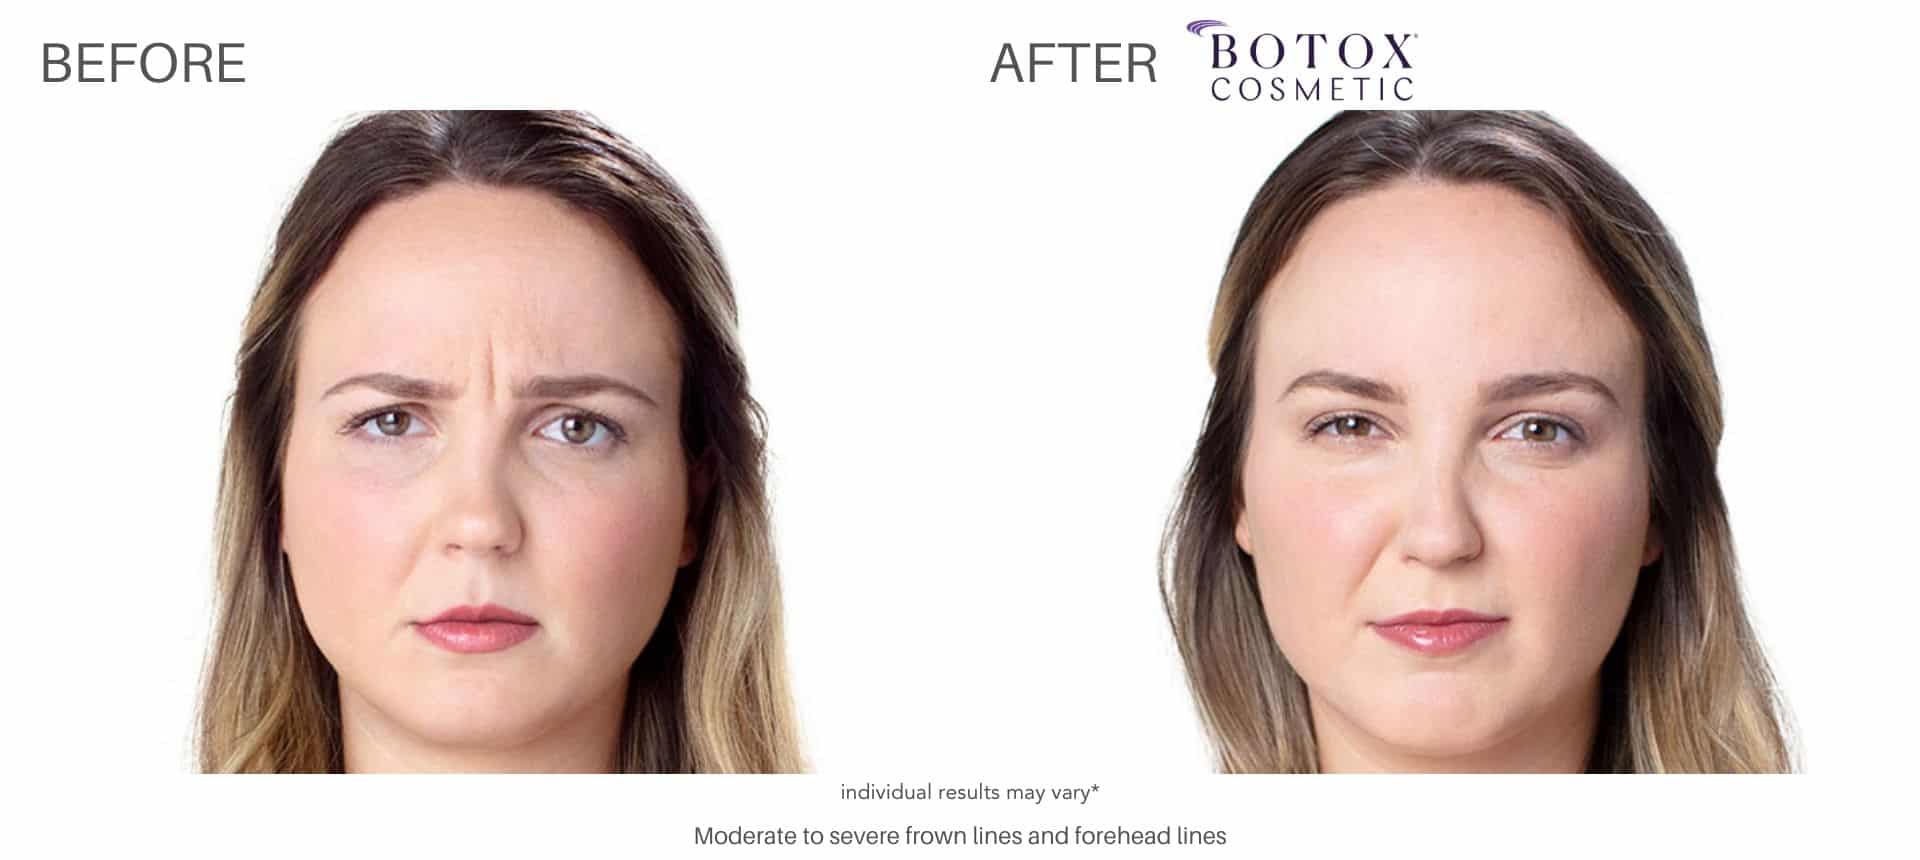 botox before and after results in Los Angeles at Sculpt DTLA.